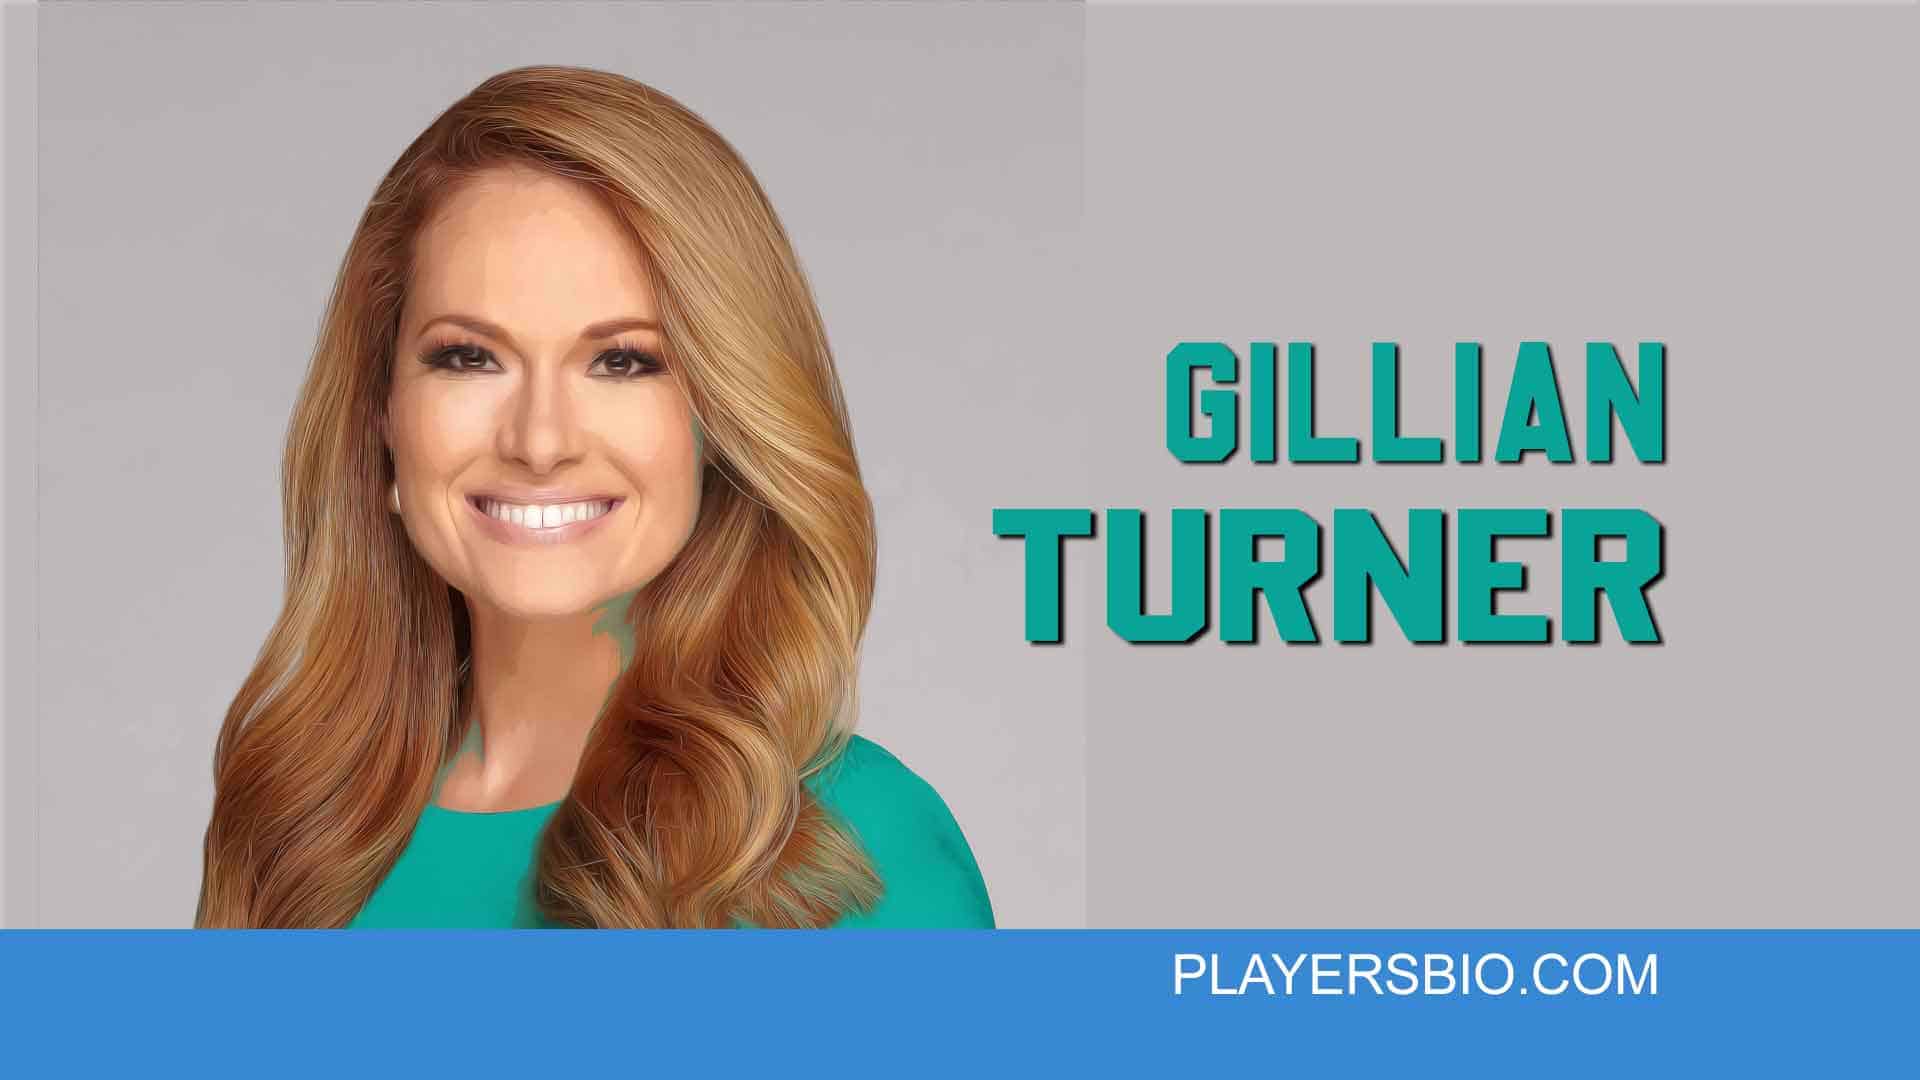 Gillian Turner is a 39 years old Fox News correspondent and former White Ho...